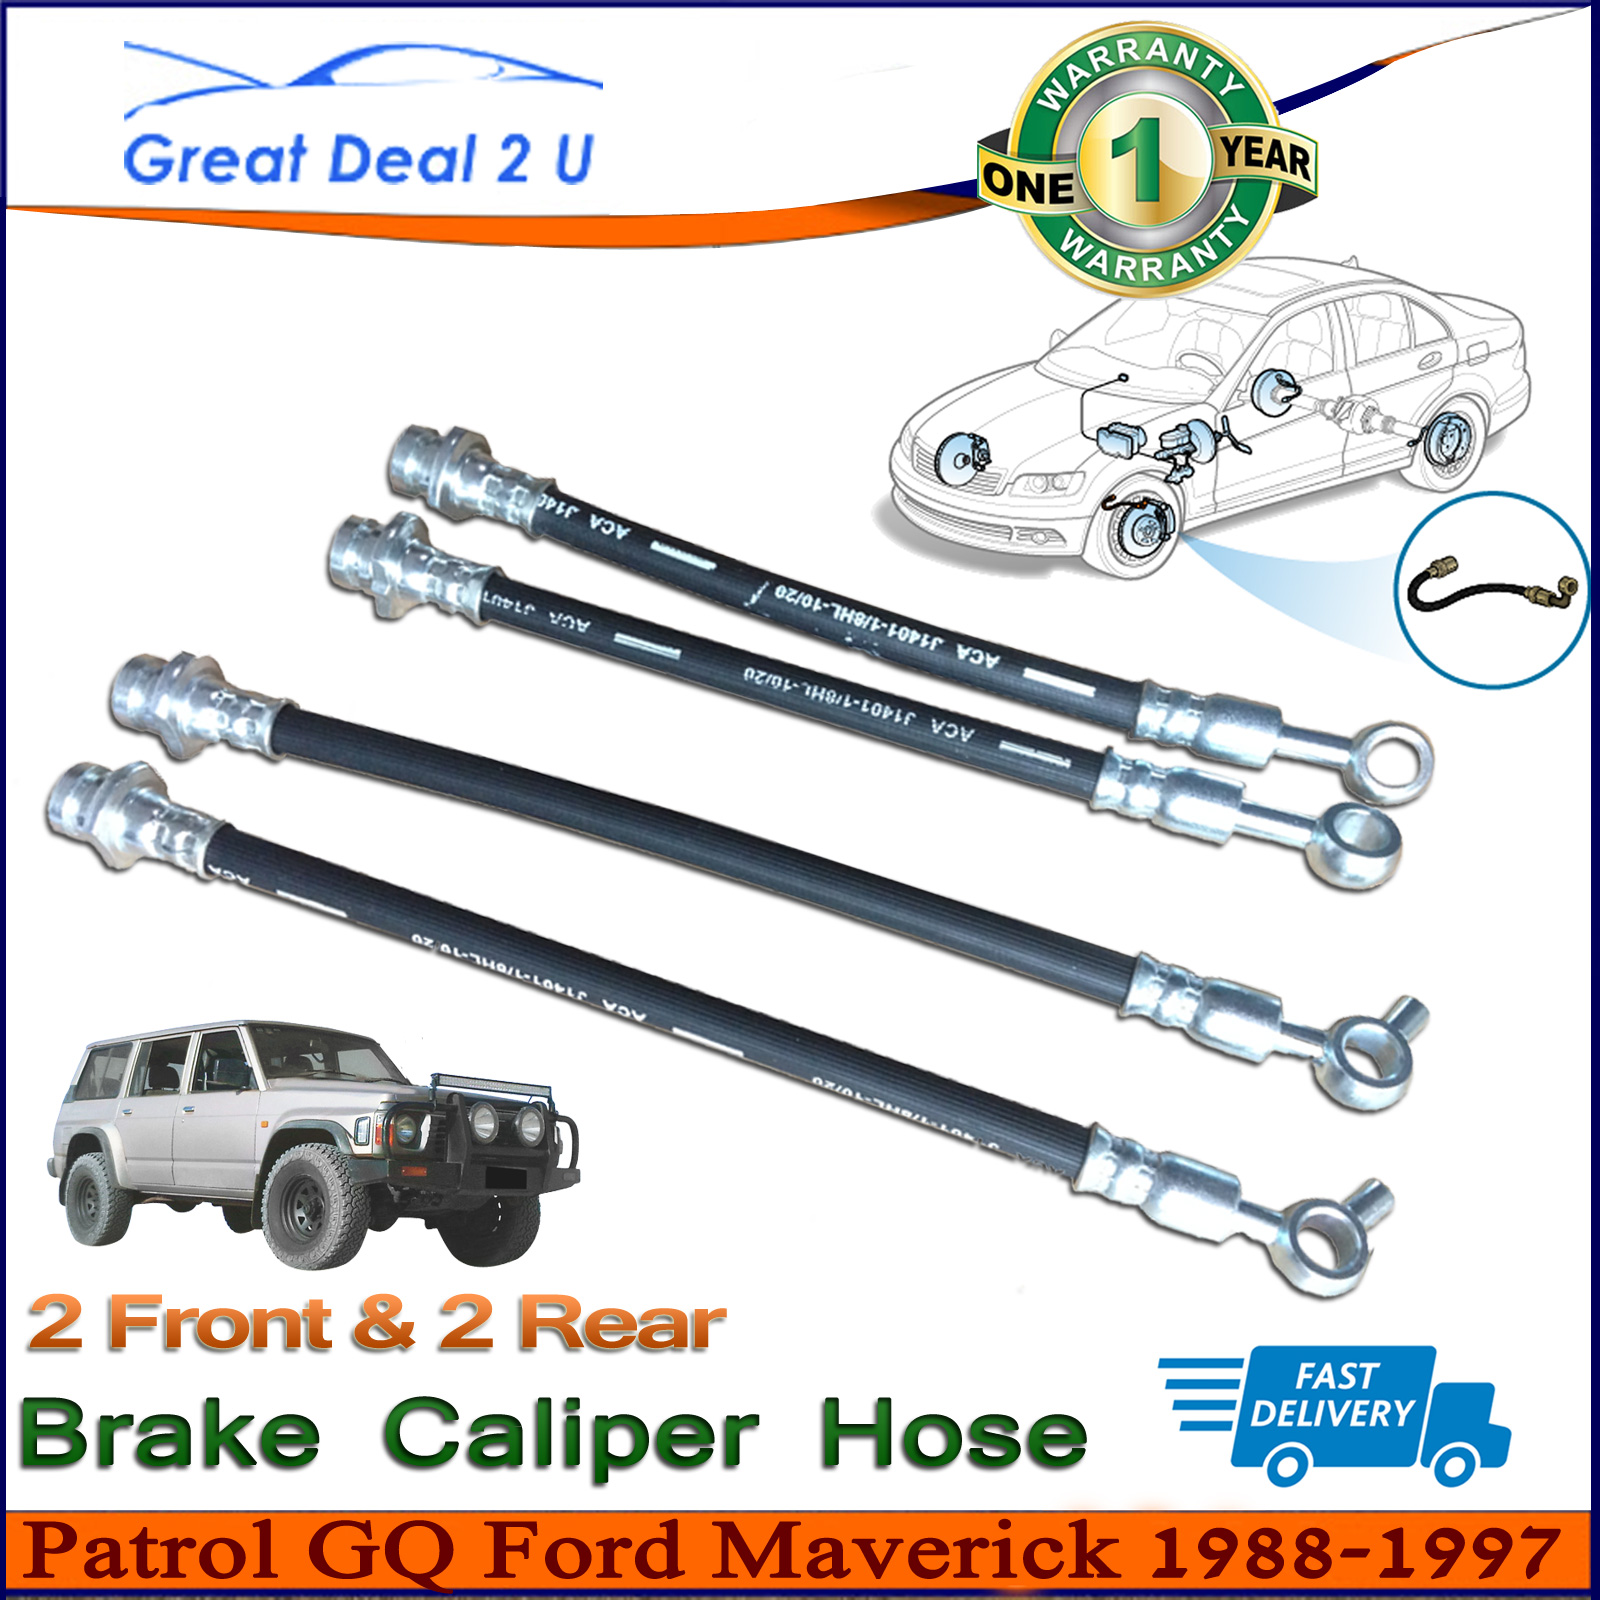 Ford territory brake lines #7